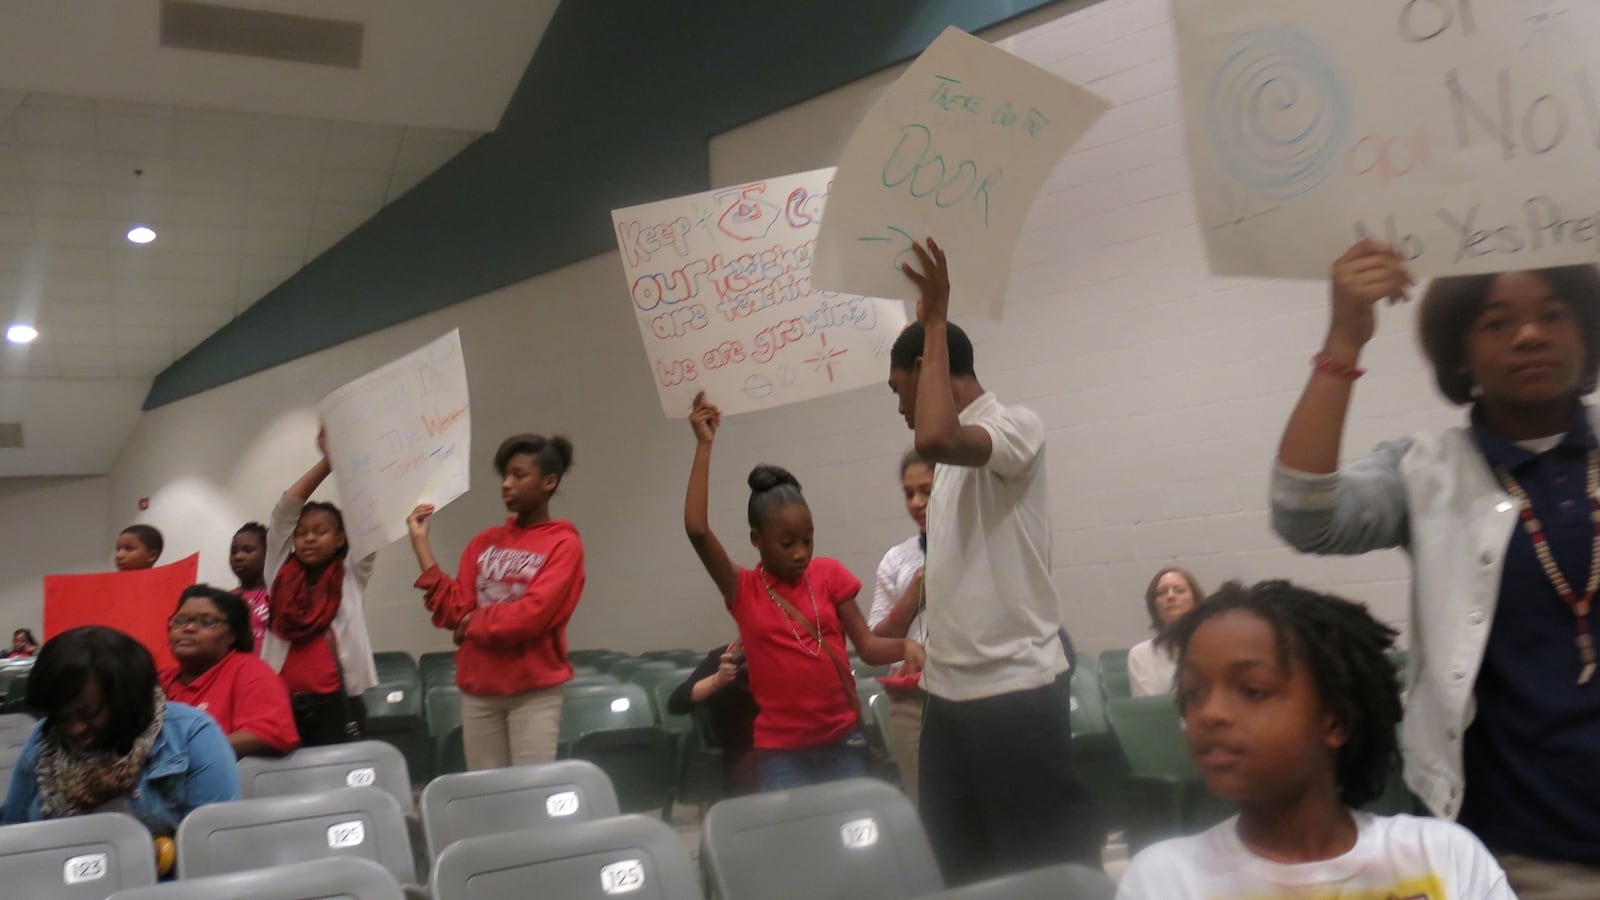 Several American Way students held signs during Monday night's school takeover community meeting with Yes Prep.